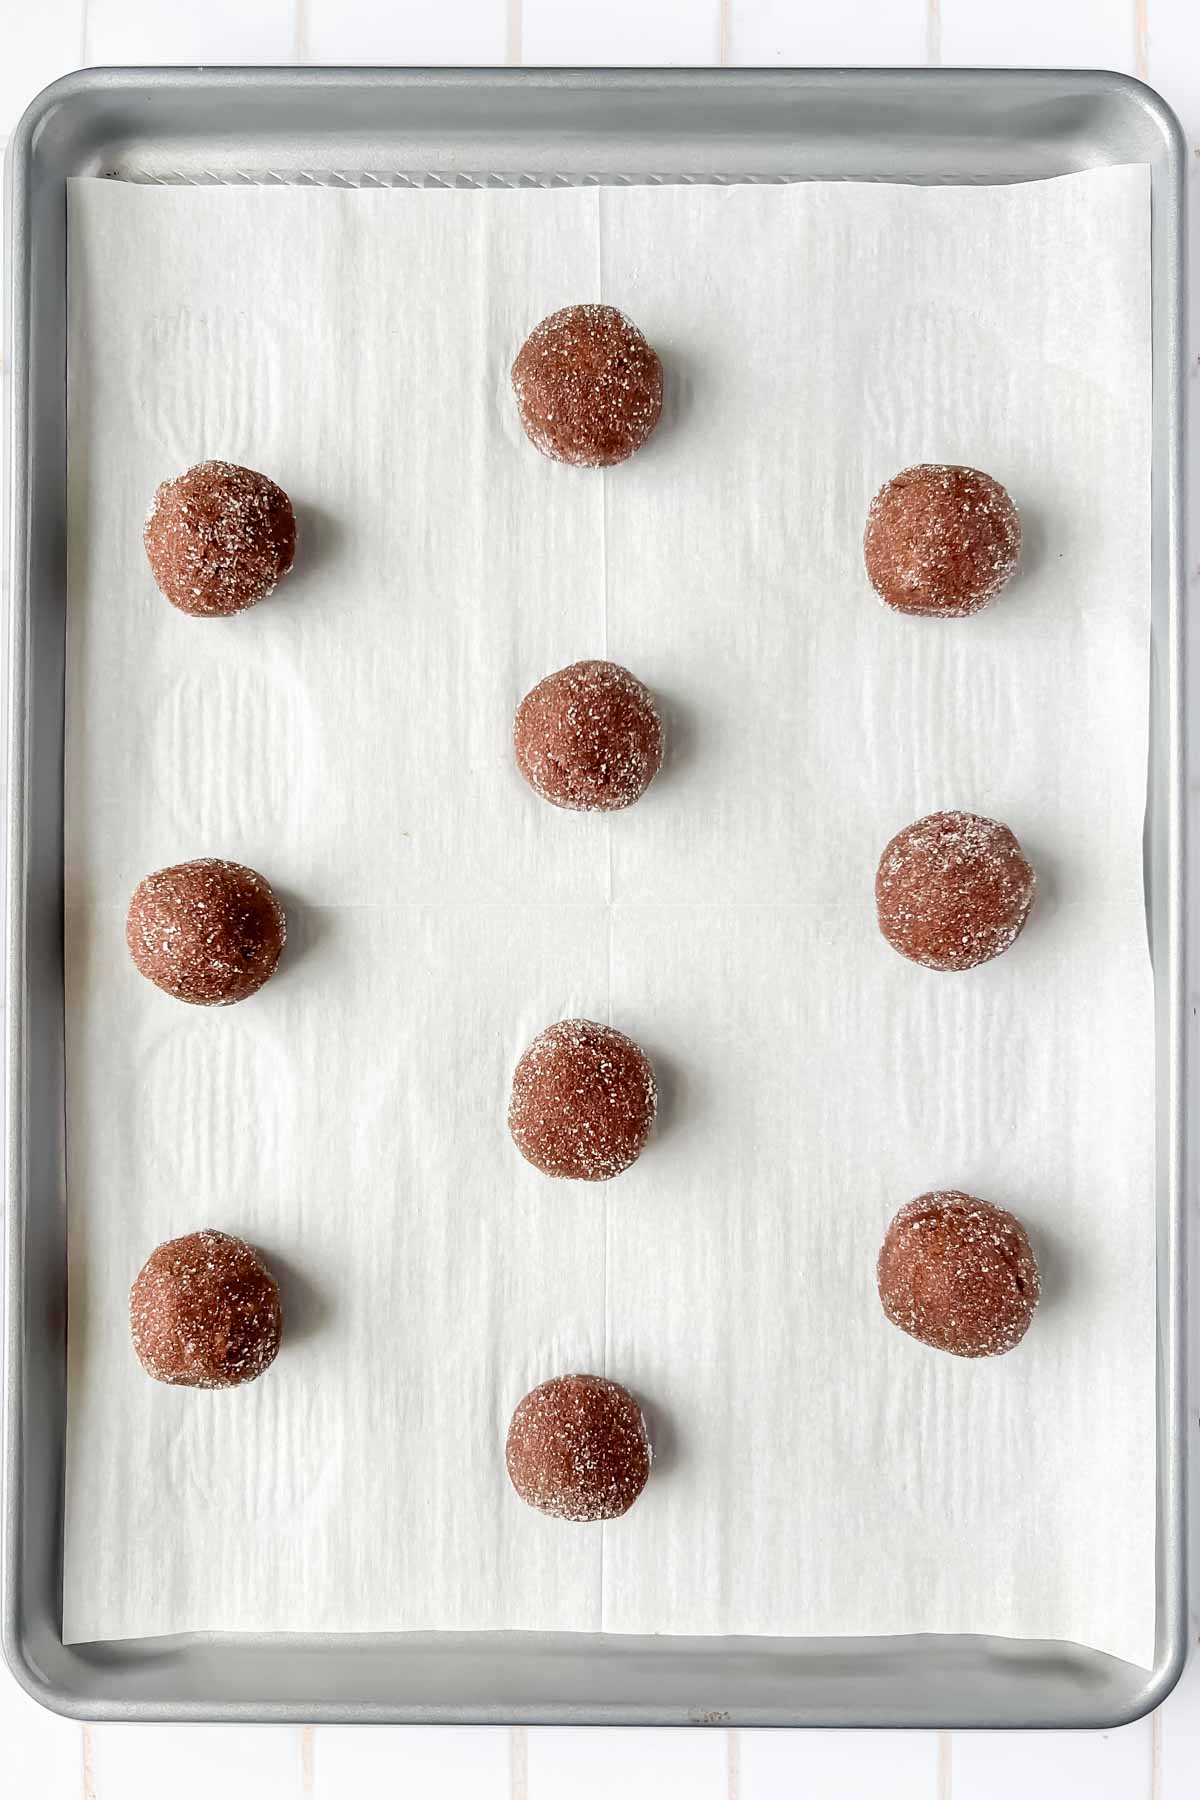 chocolate peppermint kiss cookie dough balls aligned on silver baking tray lined with parchment.